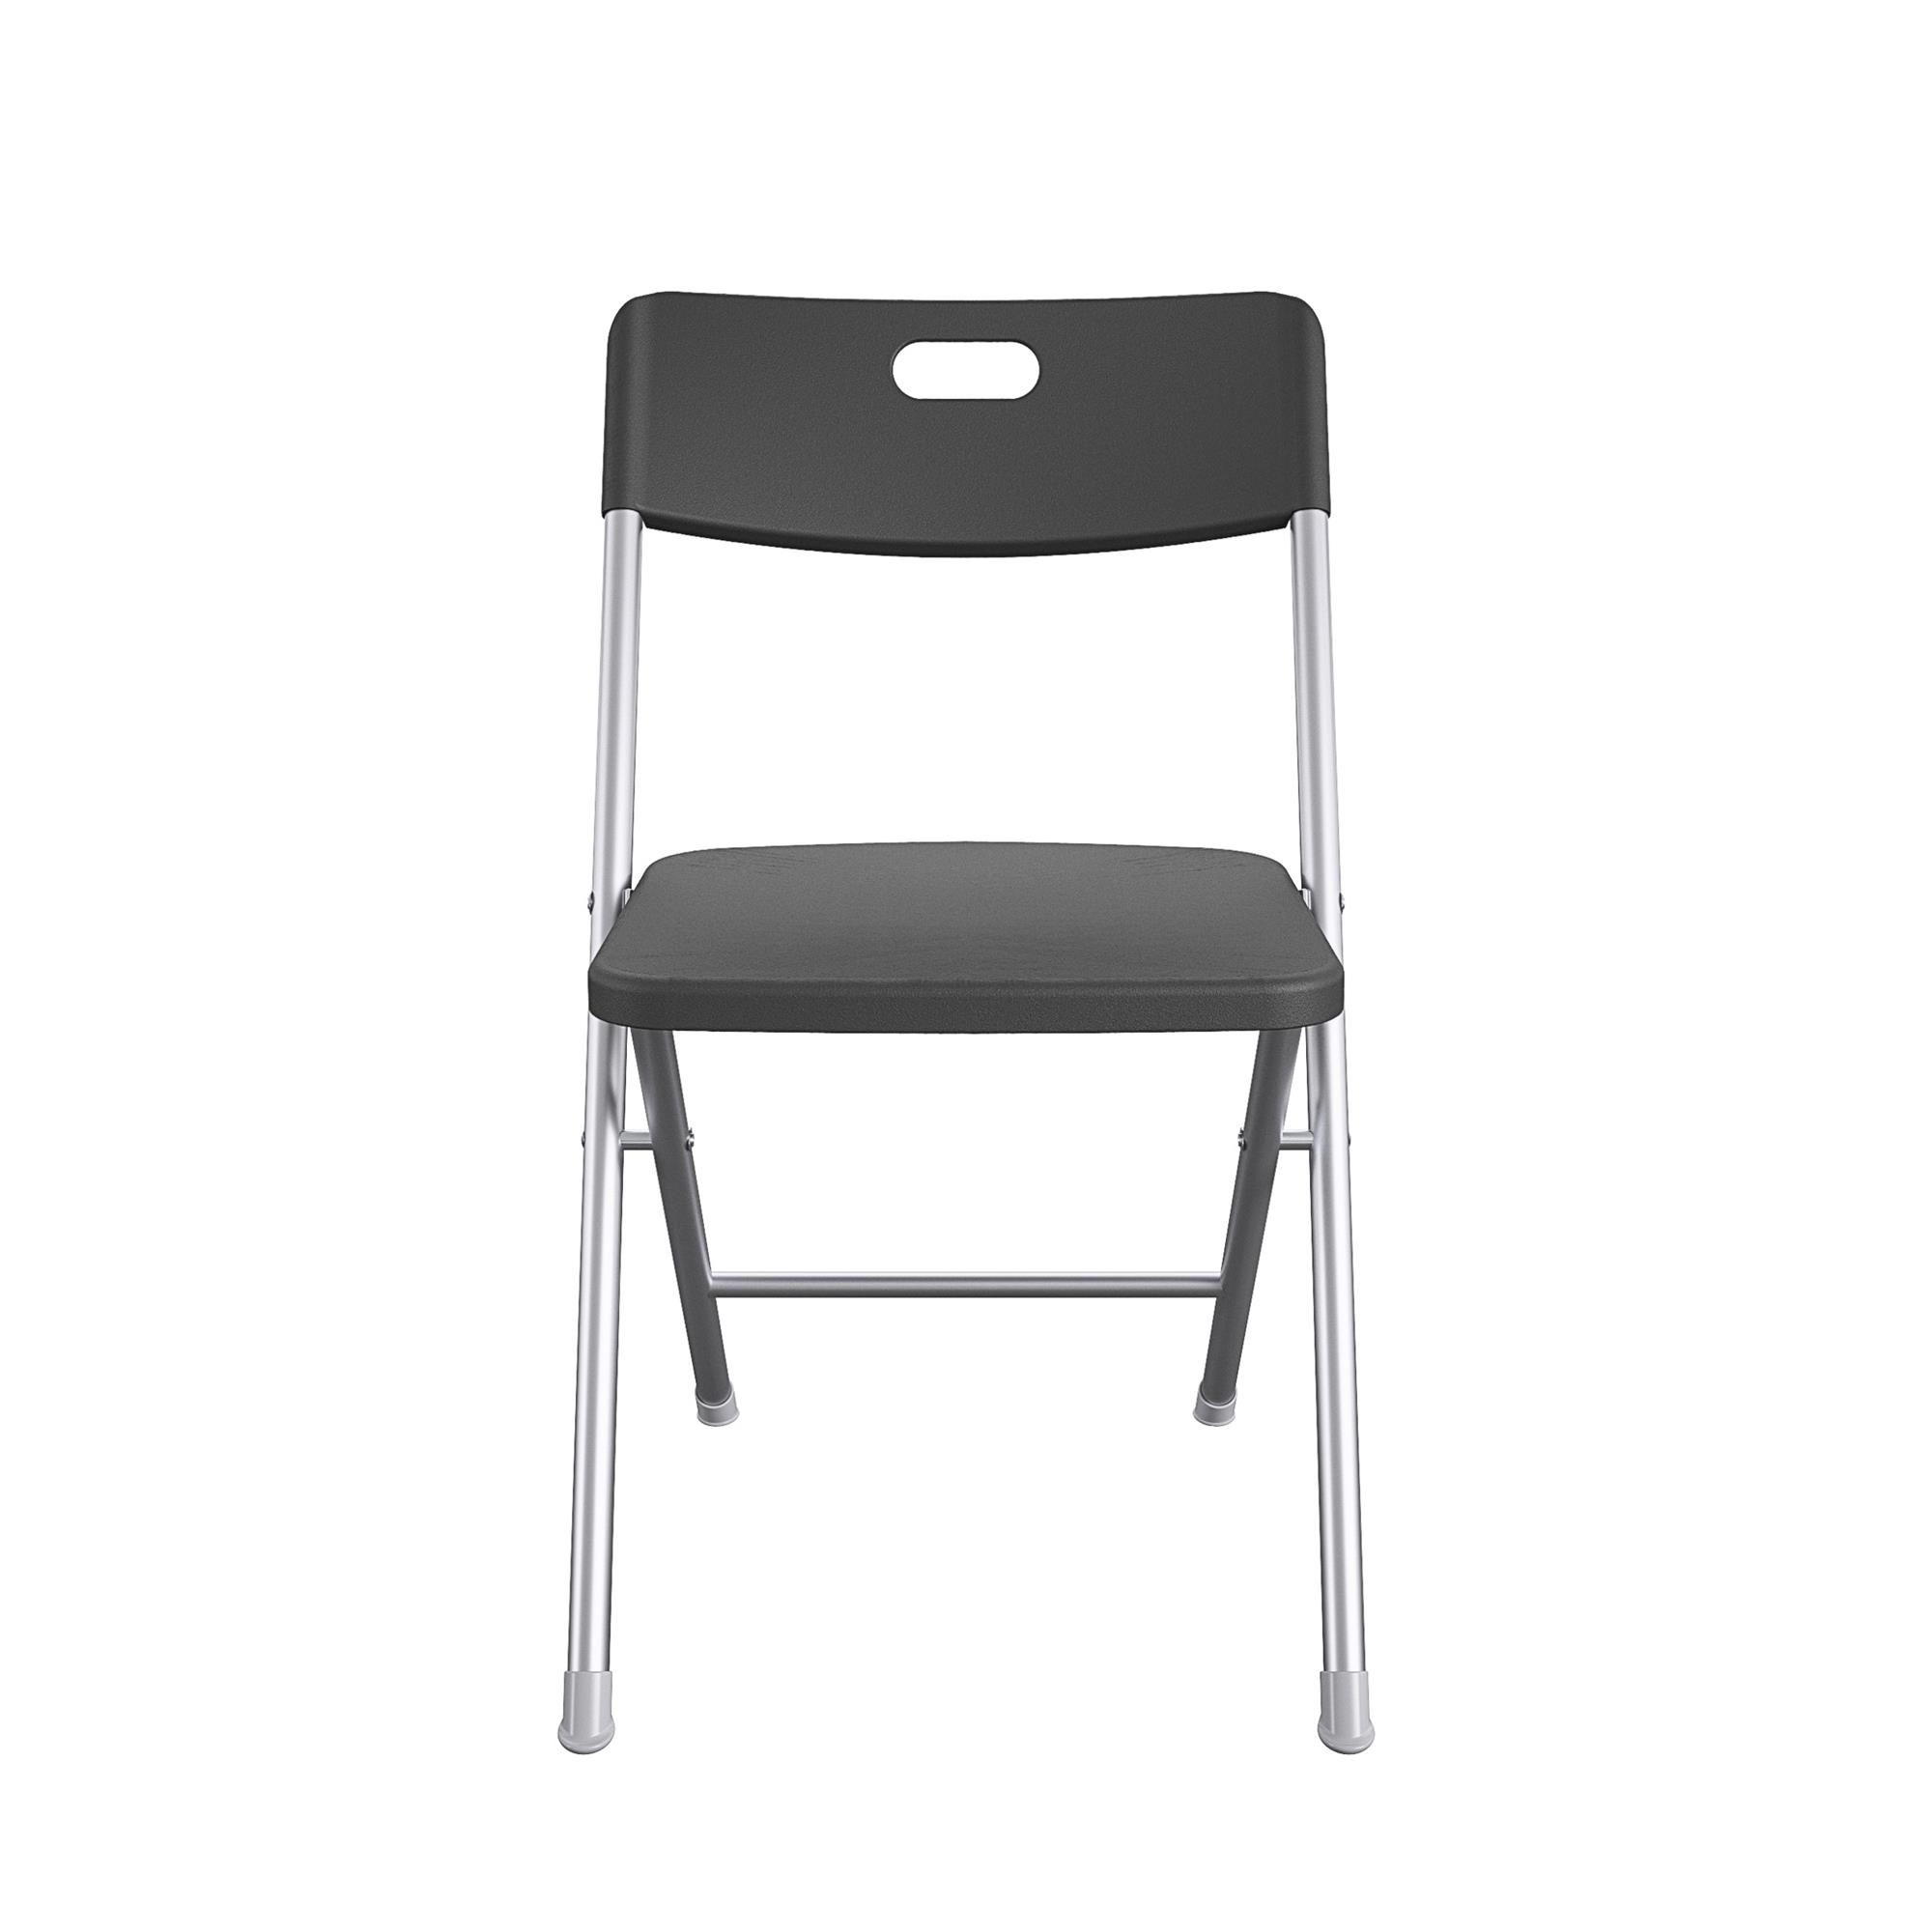 Mainstays Resin Seat & Back Folding Chair, Black - image 3 of 7